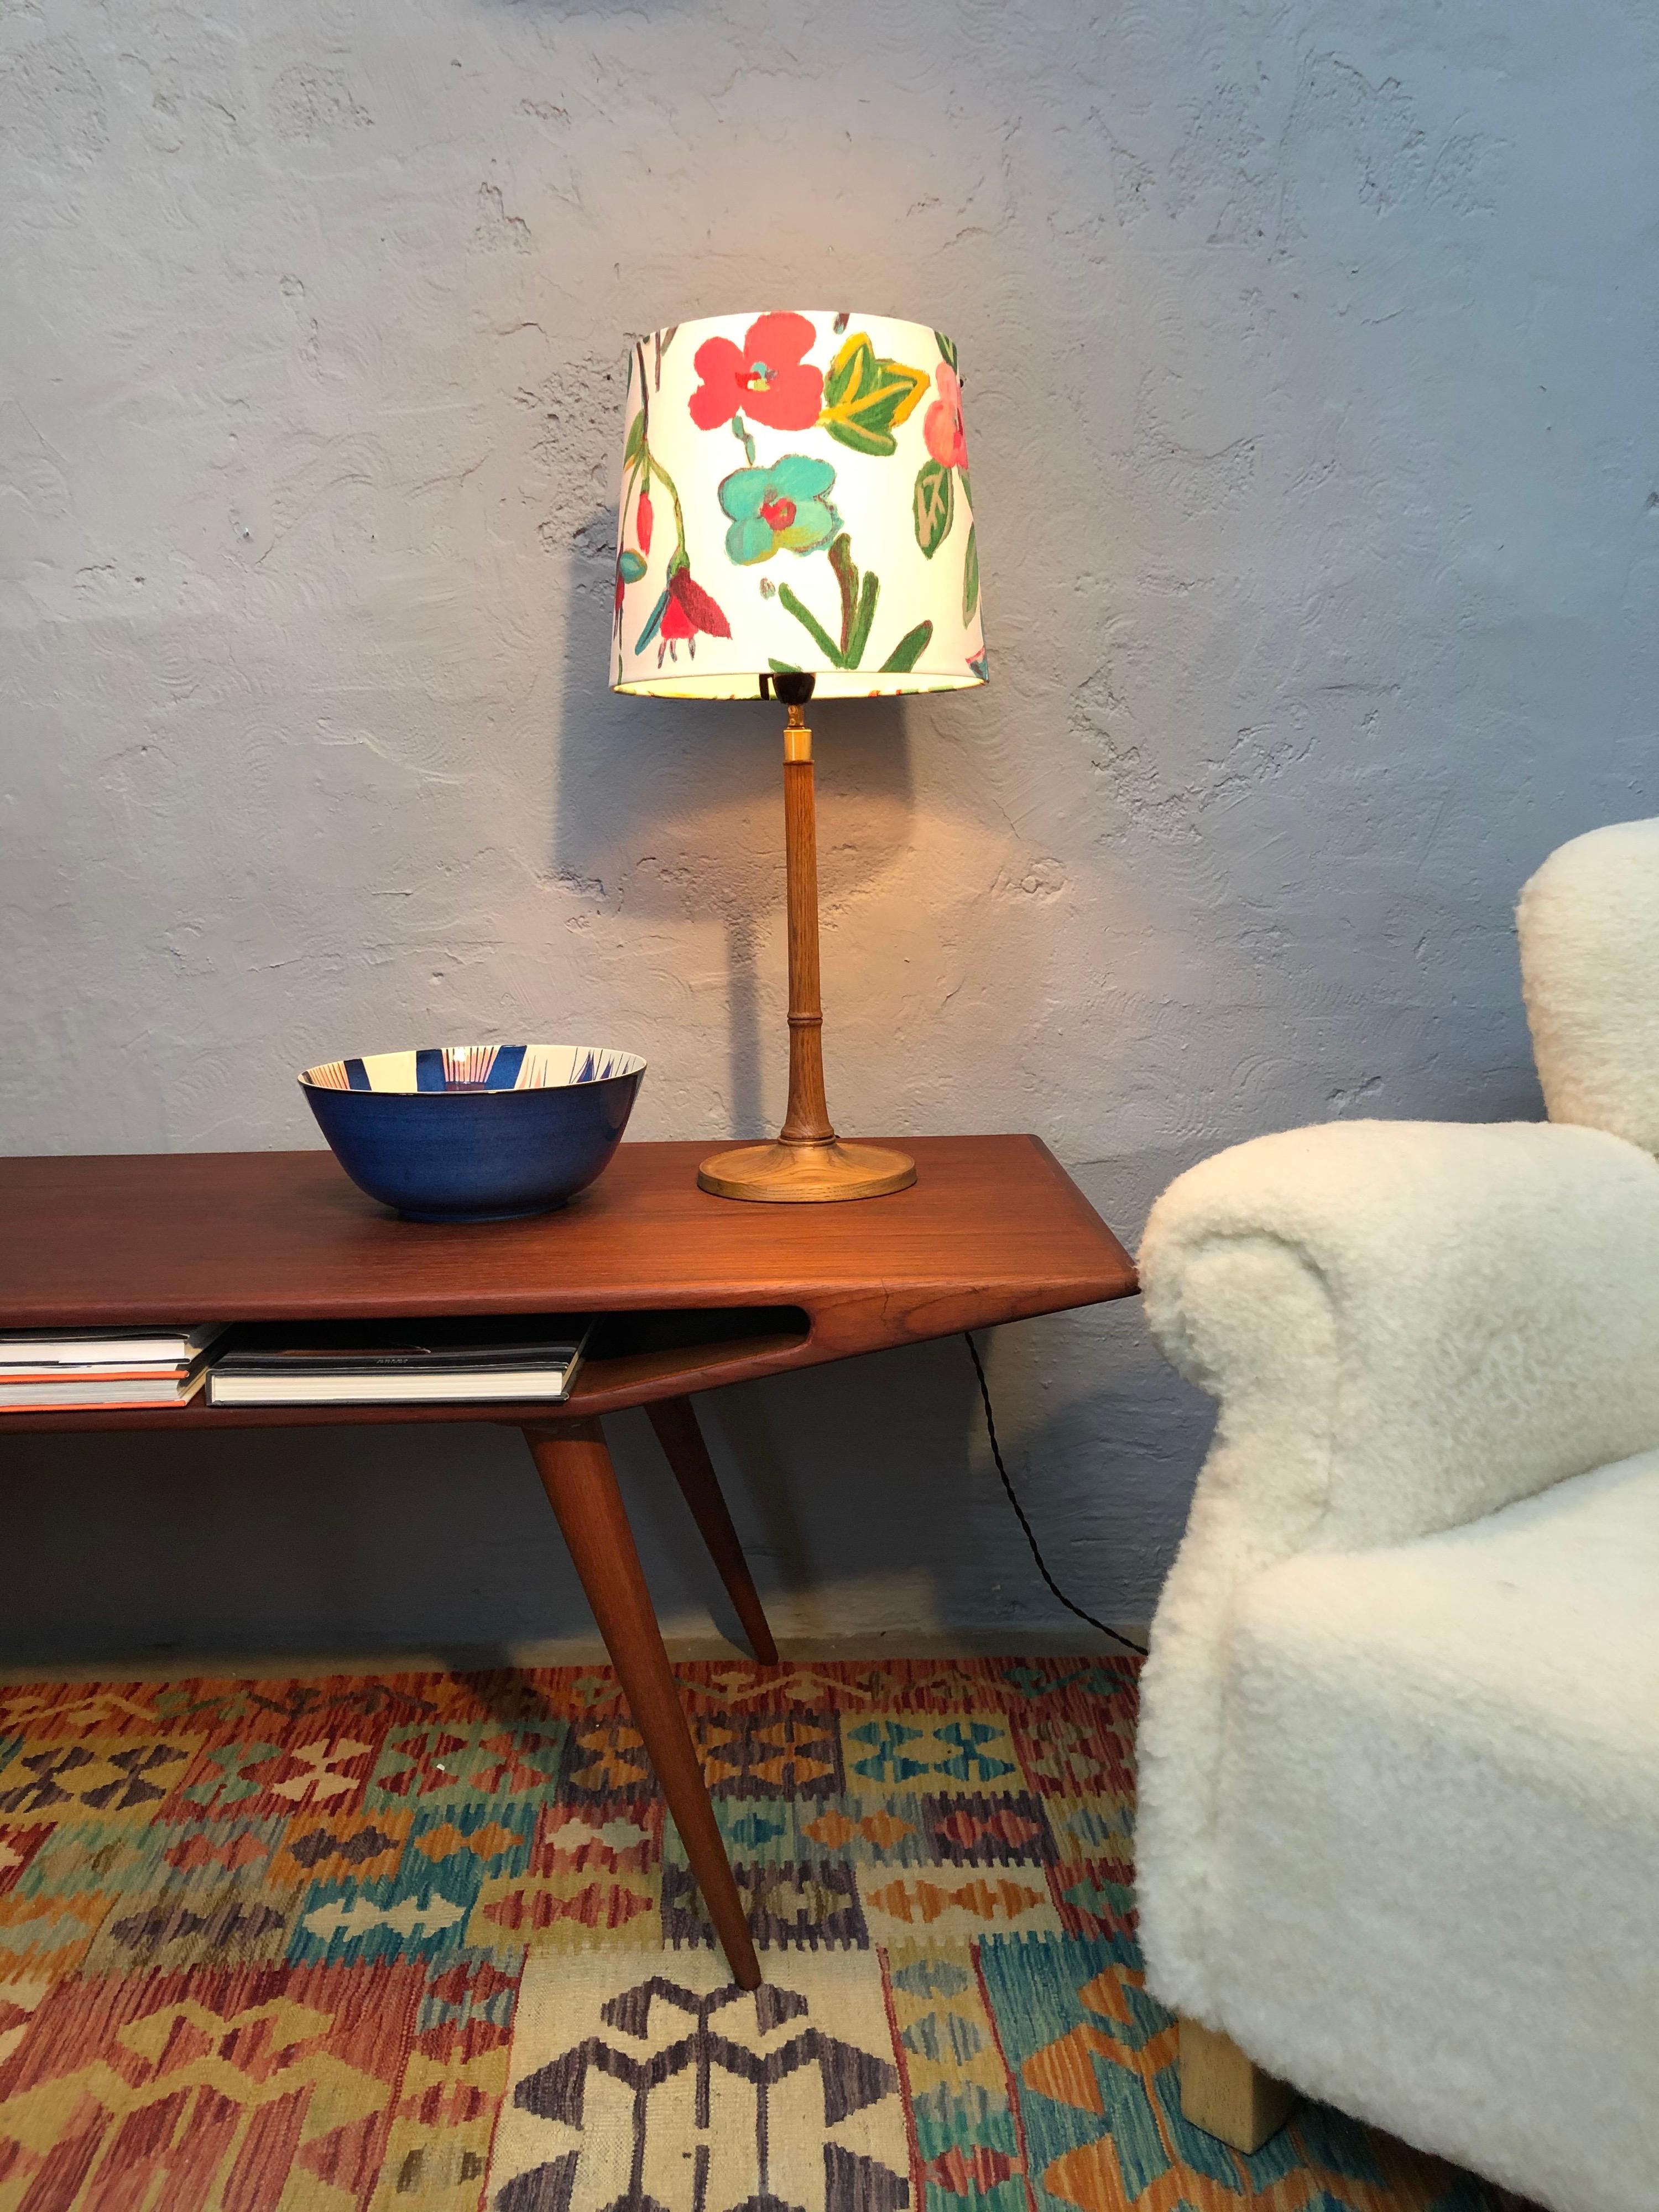 Iconic Danish Esben Klint table lamp model 301/27 in solid teak and designed for Le Klint in the 1940s.
Turned base and stem. 
Original Bakelite bulb holder and rewired.
Stunning handmade lampshade from ArtbyMaj in the manner of Joseph Frank.
Can be